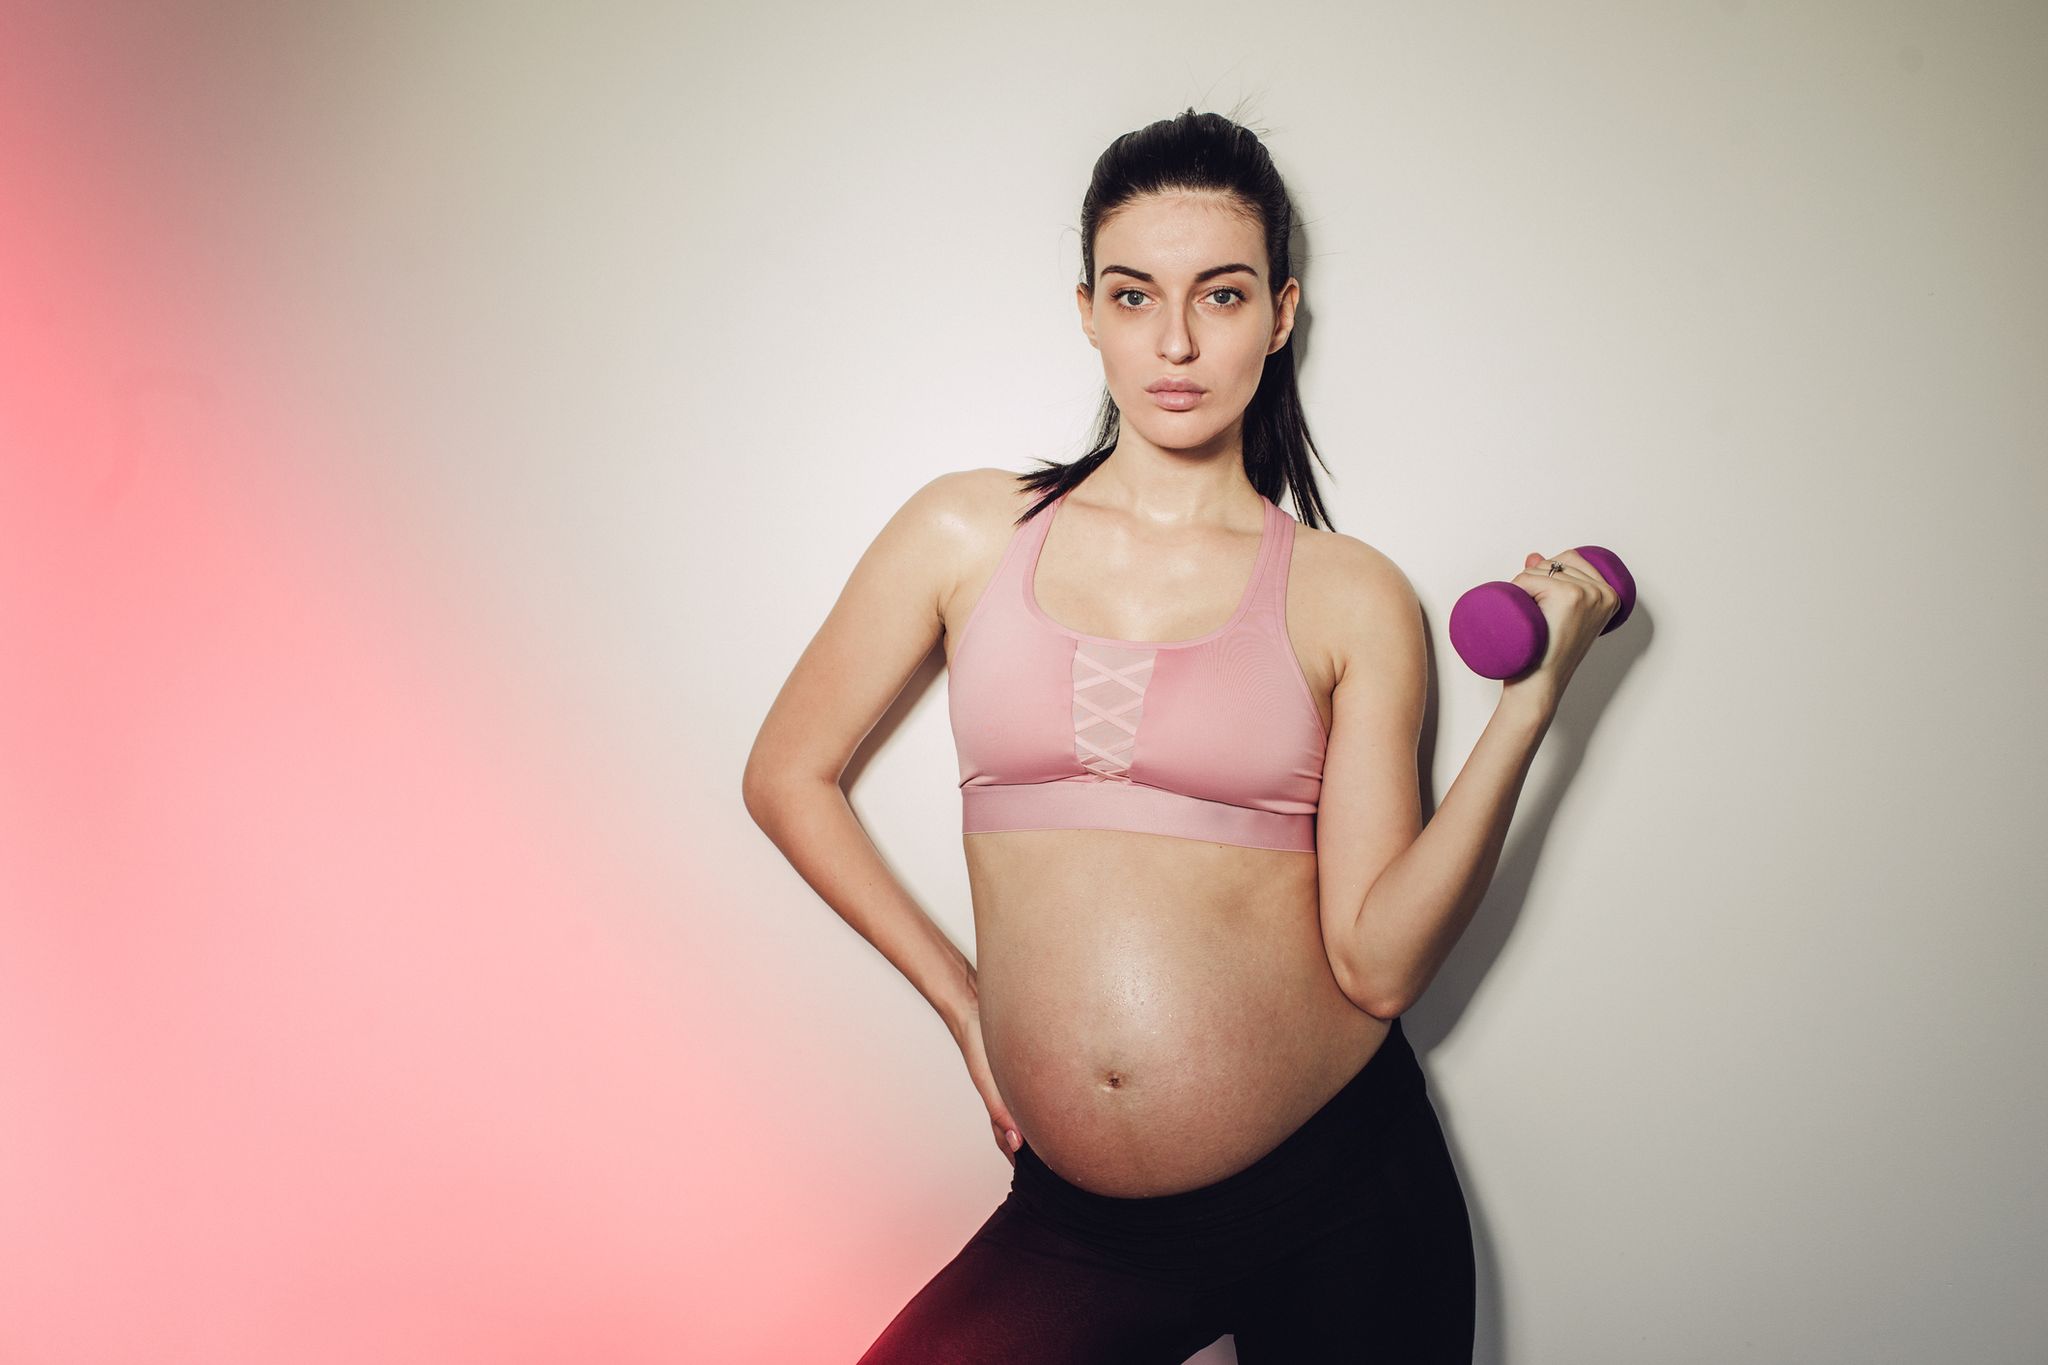 Pregnancy Exercises: Pregnancy Workouts For Each Trimester